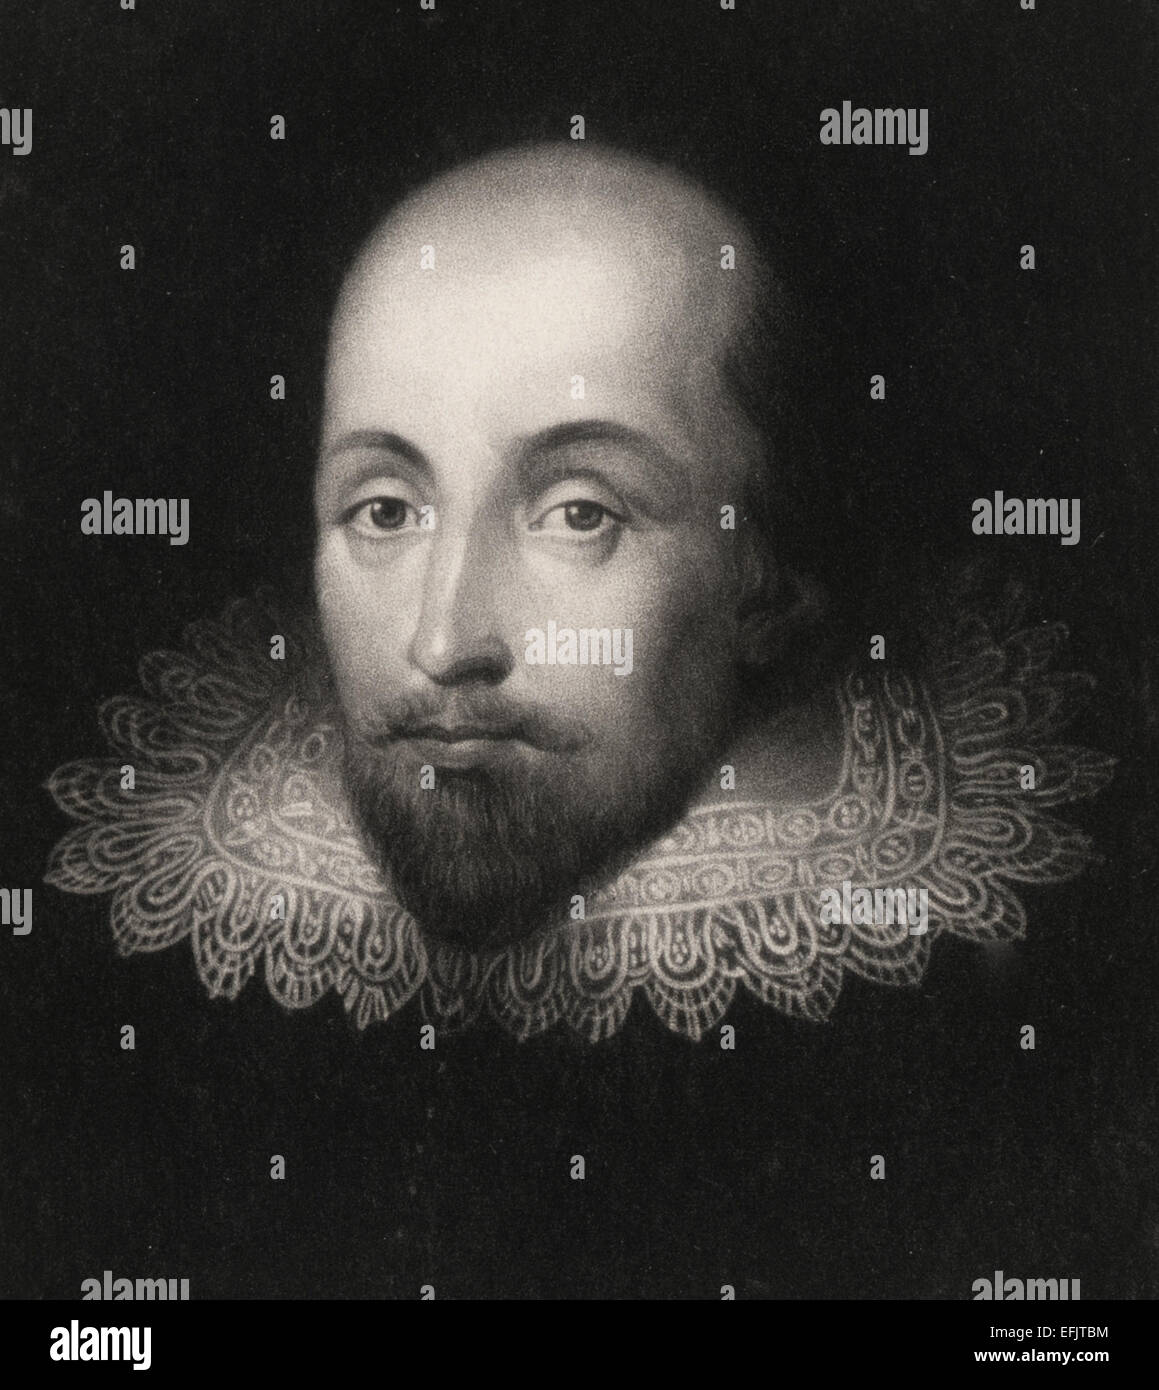 William Shakespeare, bust portrait with lace collar, facing front. Stock Photo